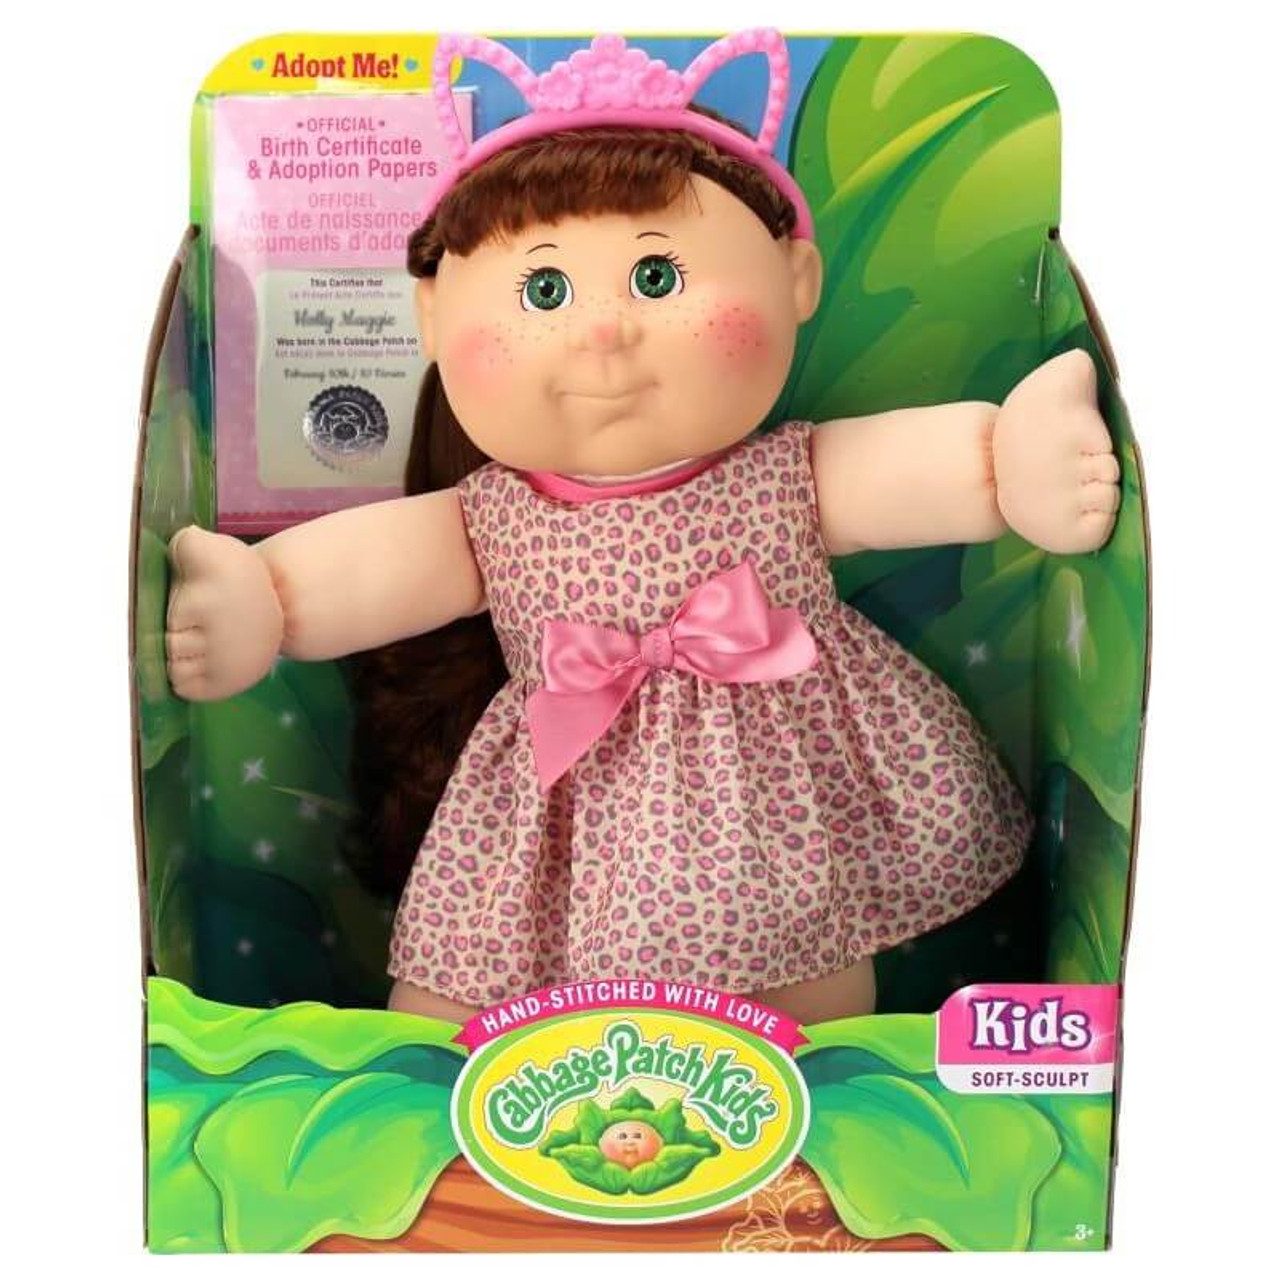 cabbage patch doll website